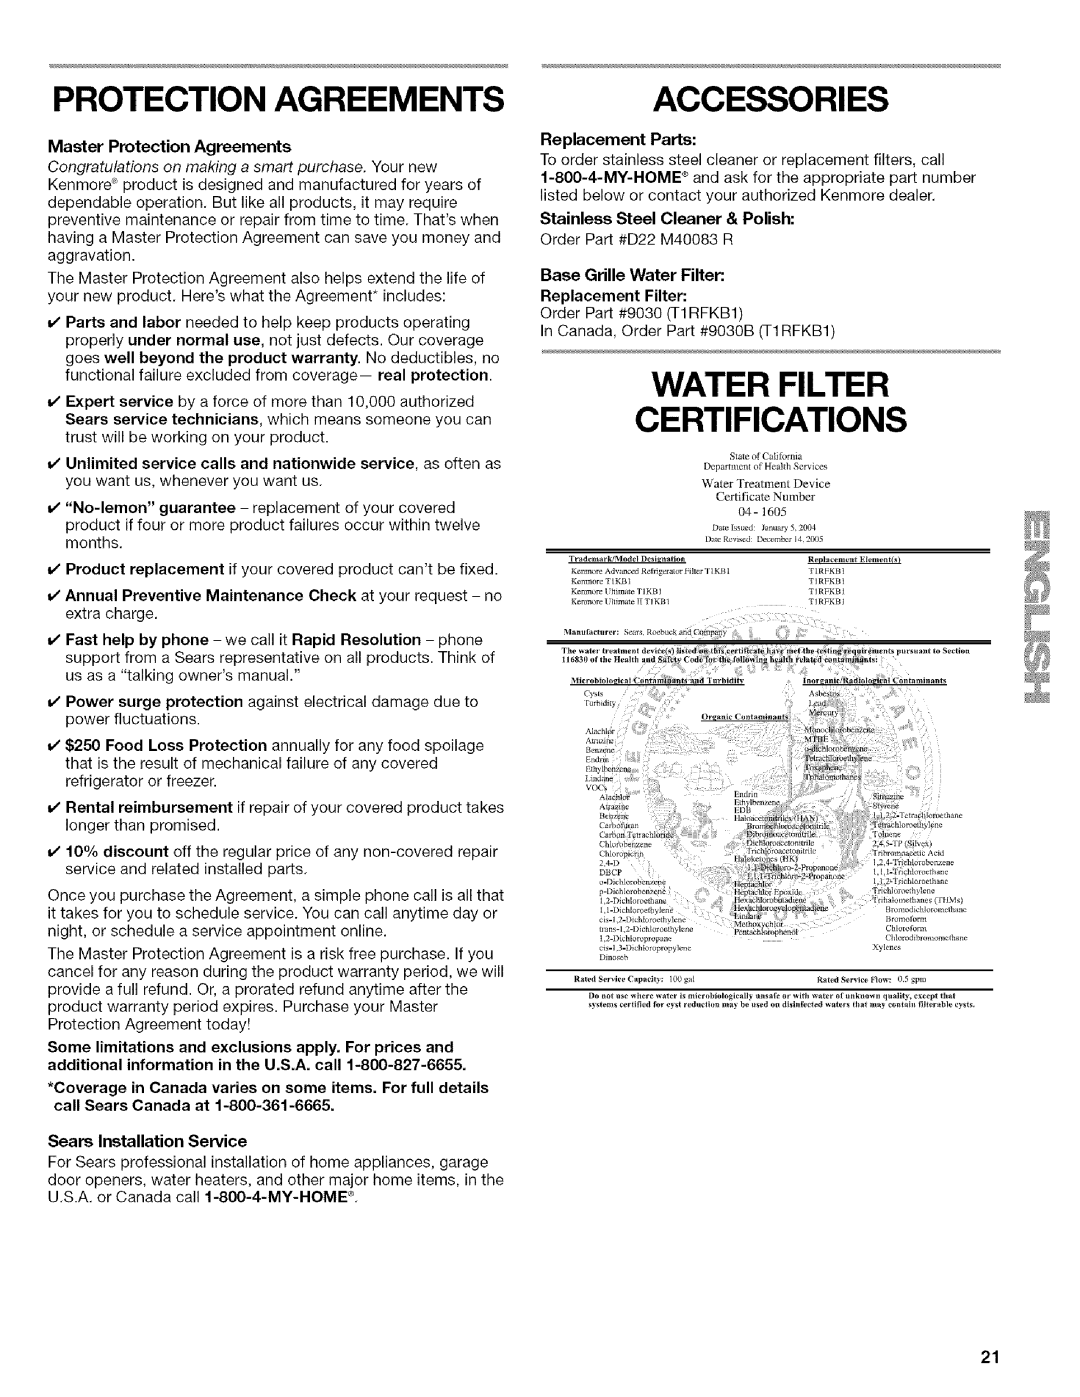 Kenmore WIOI67097A Water Filter, Certifications, Accessories, Master Protection Agreements, Sears Installation Service 